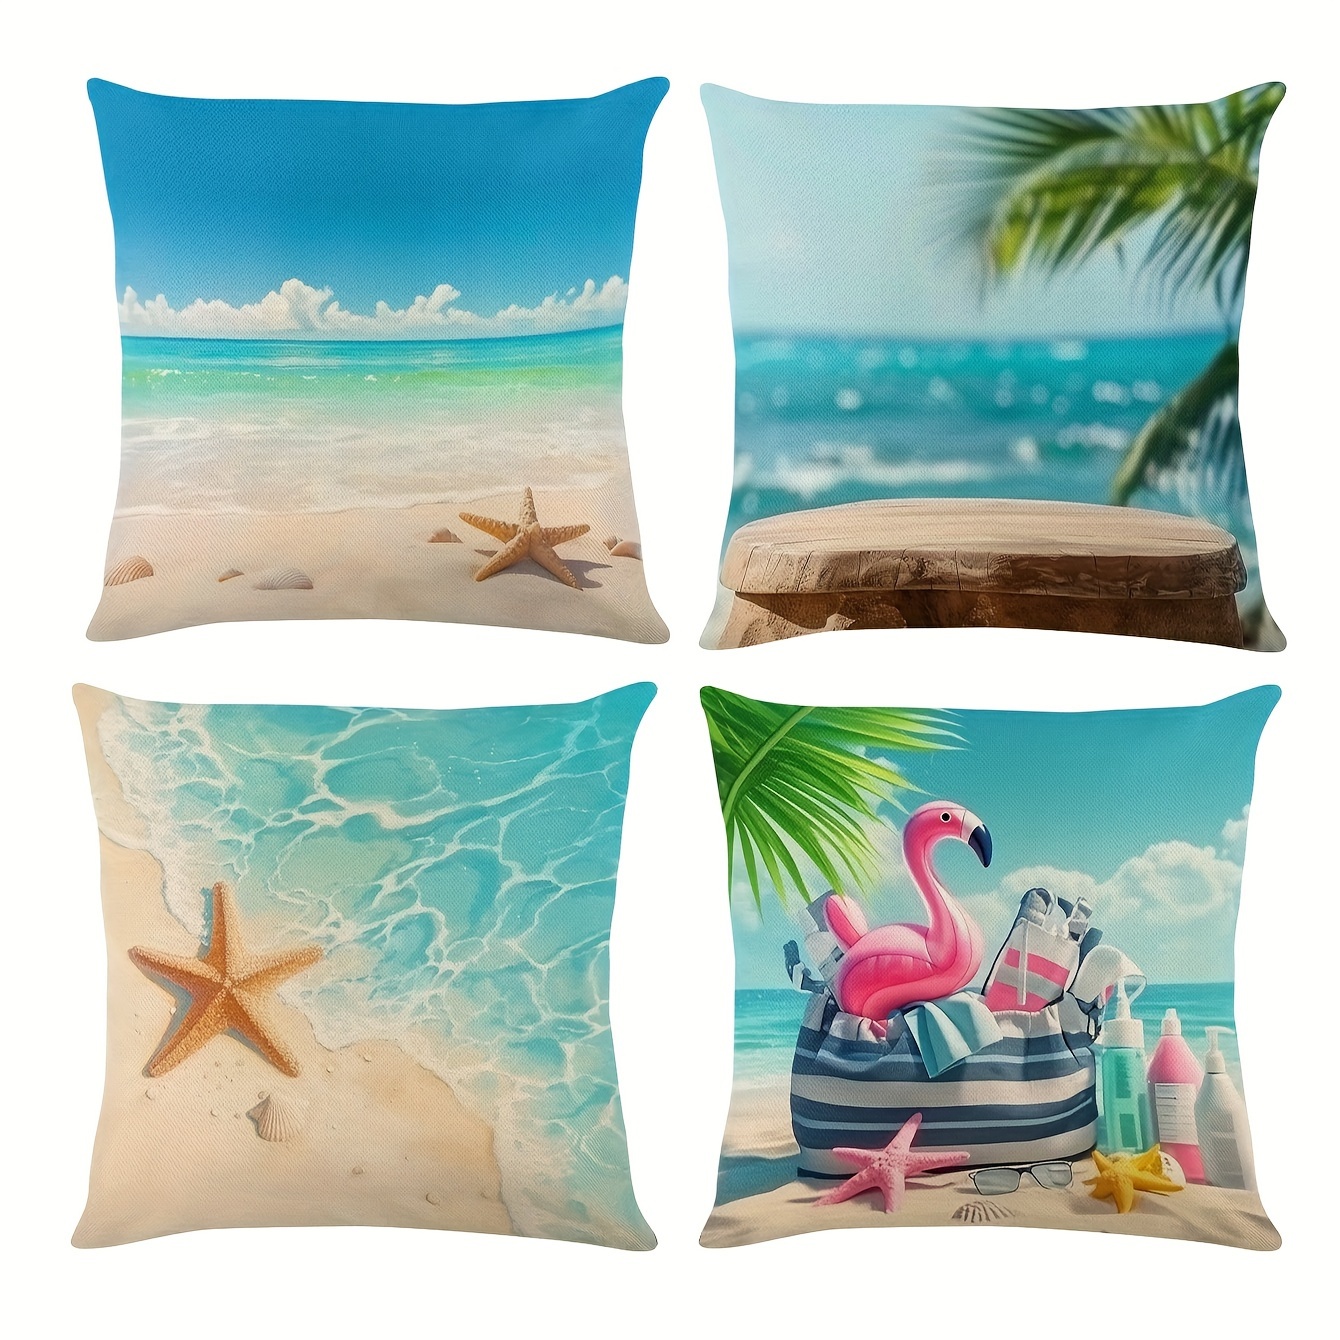 

4-piece Set, Coastal Theme Beach & Palm Ocean Series, 17.72in Square Linen Throw Pillow Covers, Modern Single-side Printed Cushion Cases, Soft And Comfortable Home Decor For (covers Only)